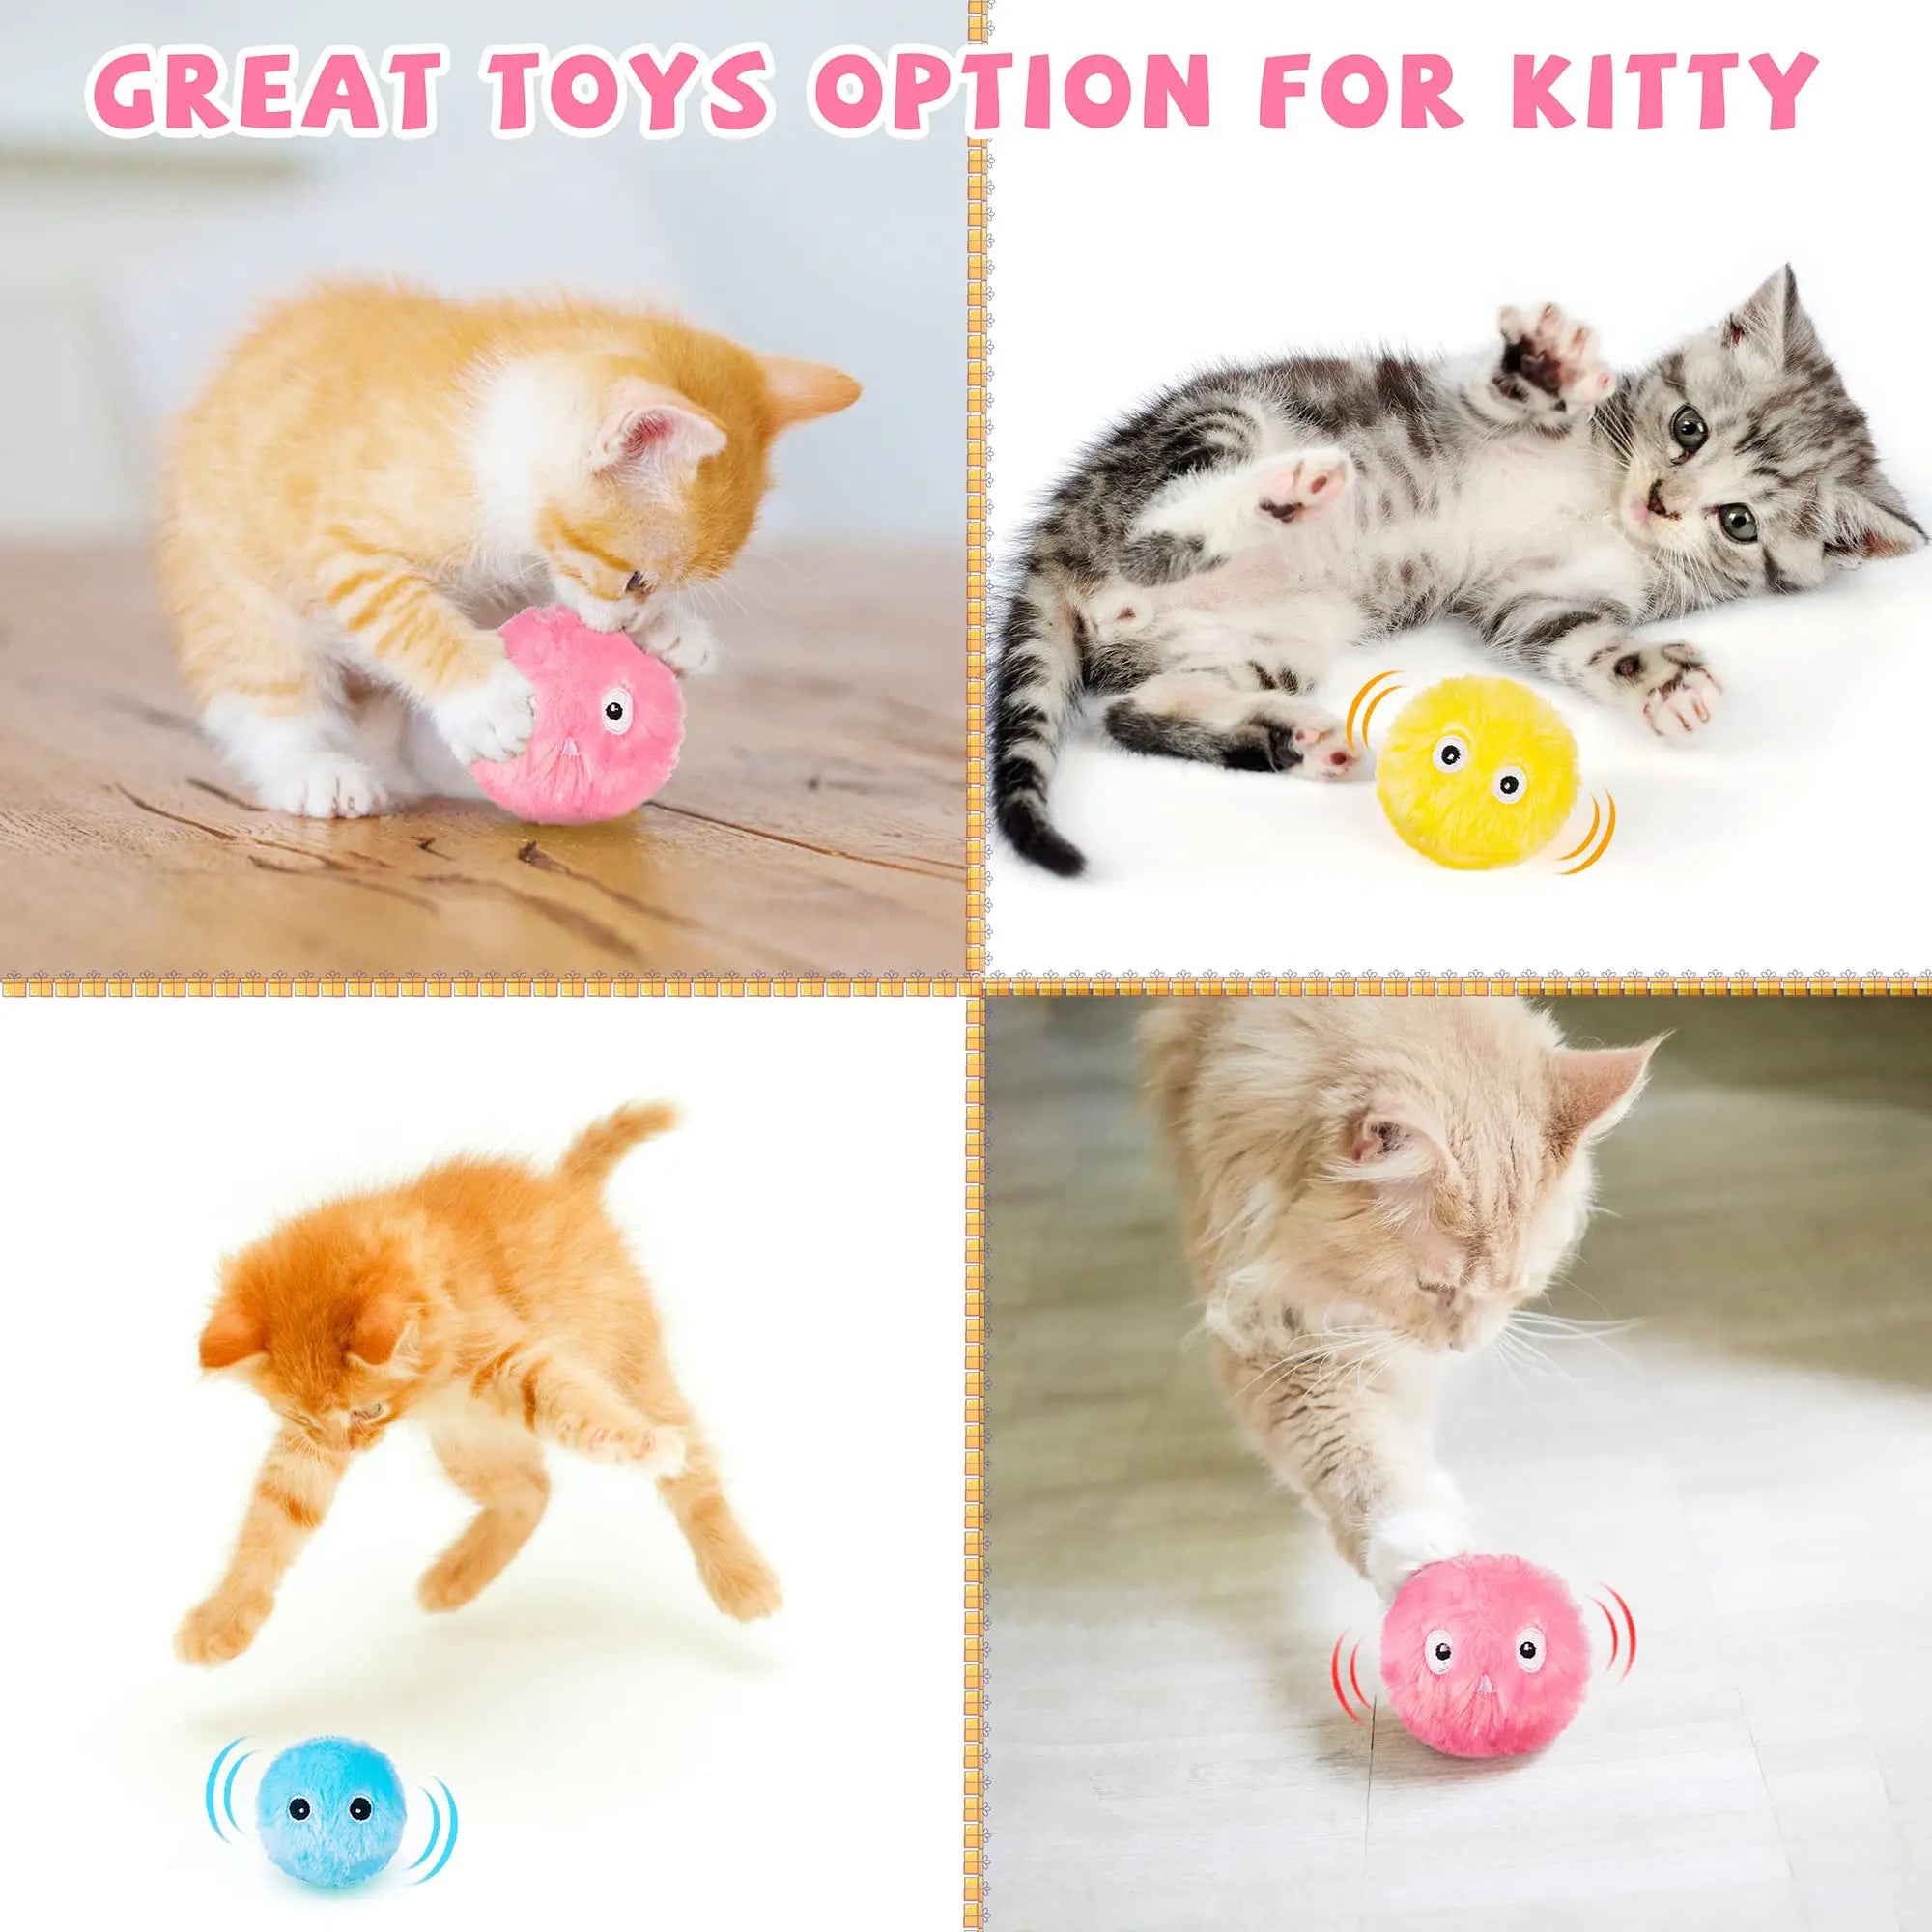 Interactive Catnip Ball Toy: Smart Fun for Cats!